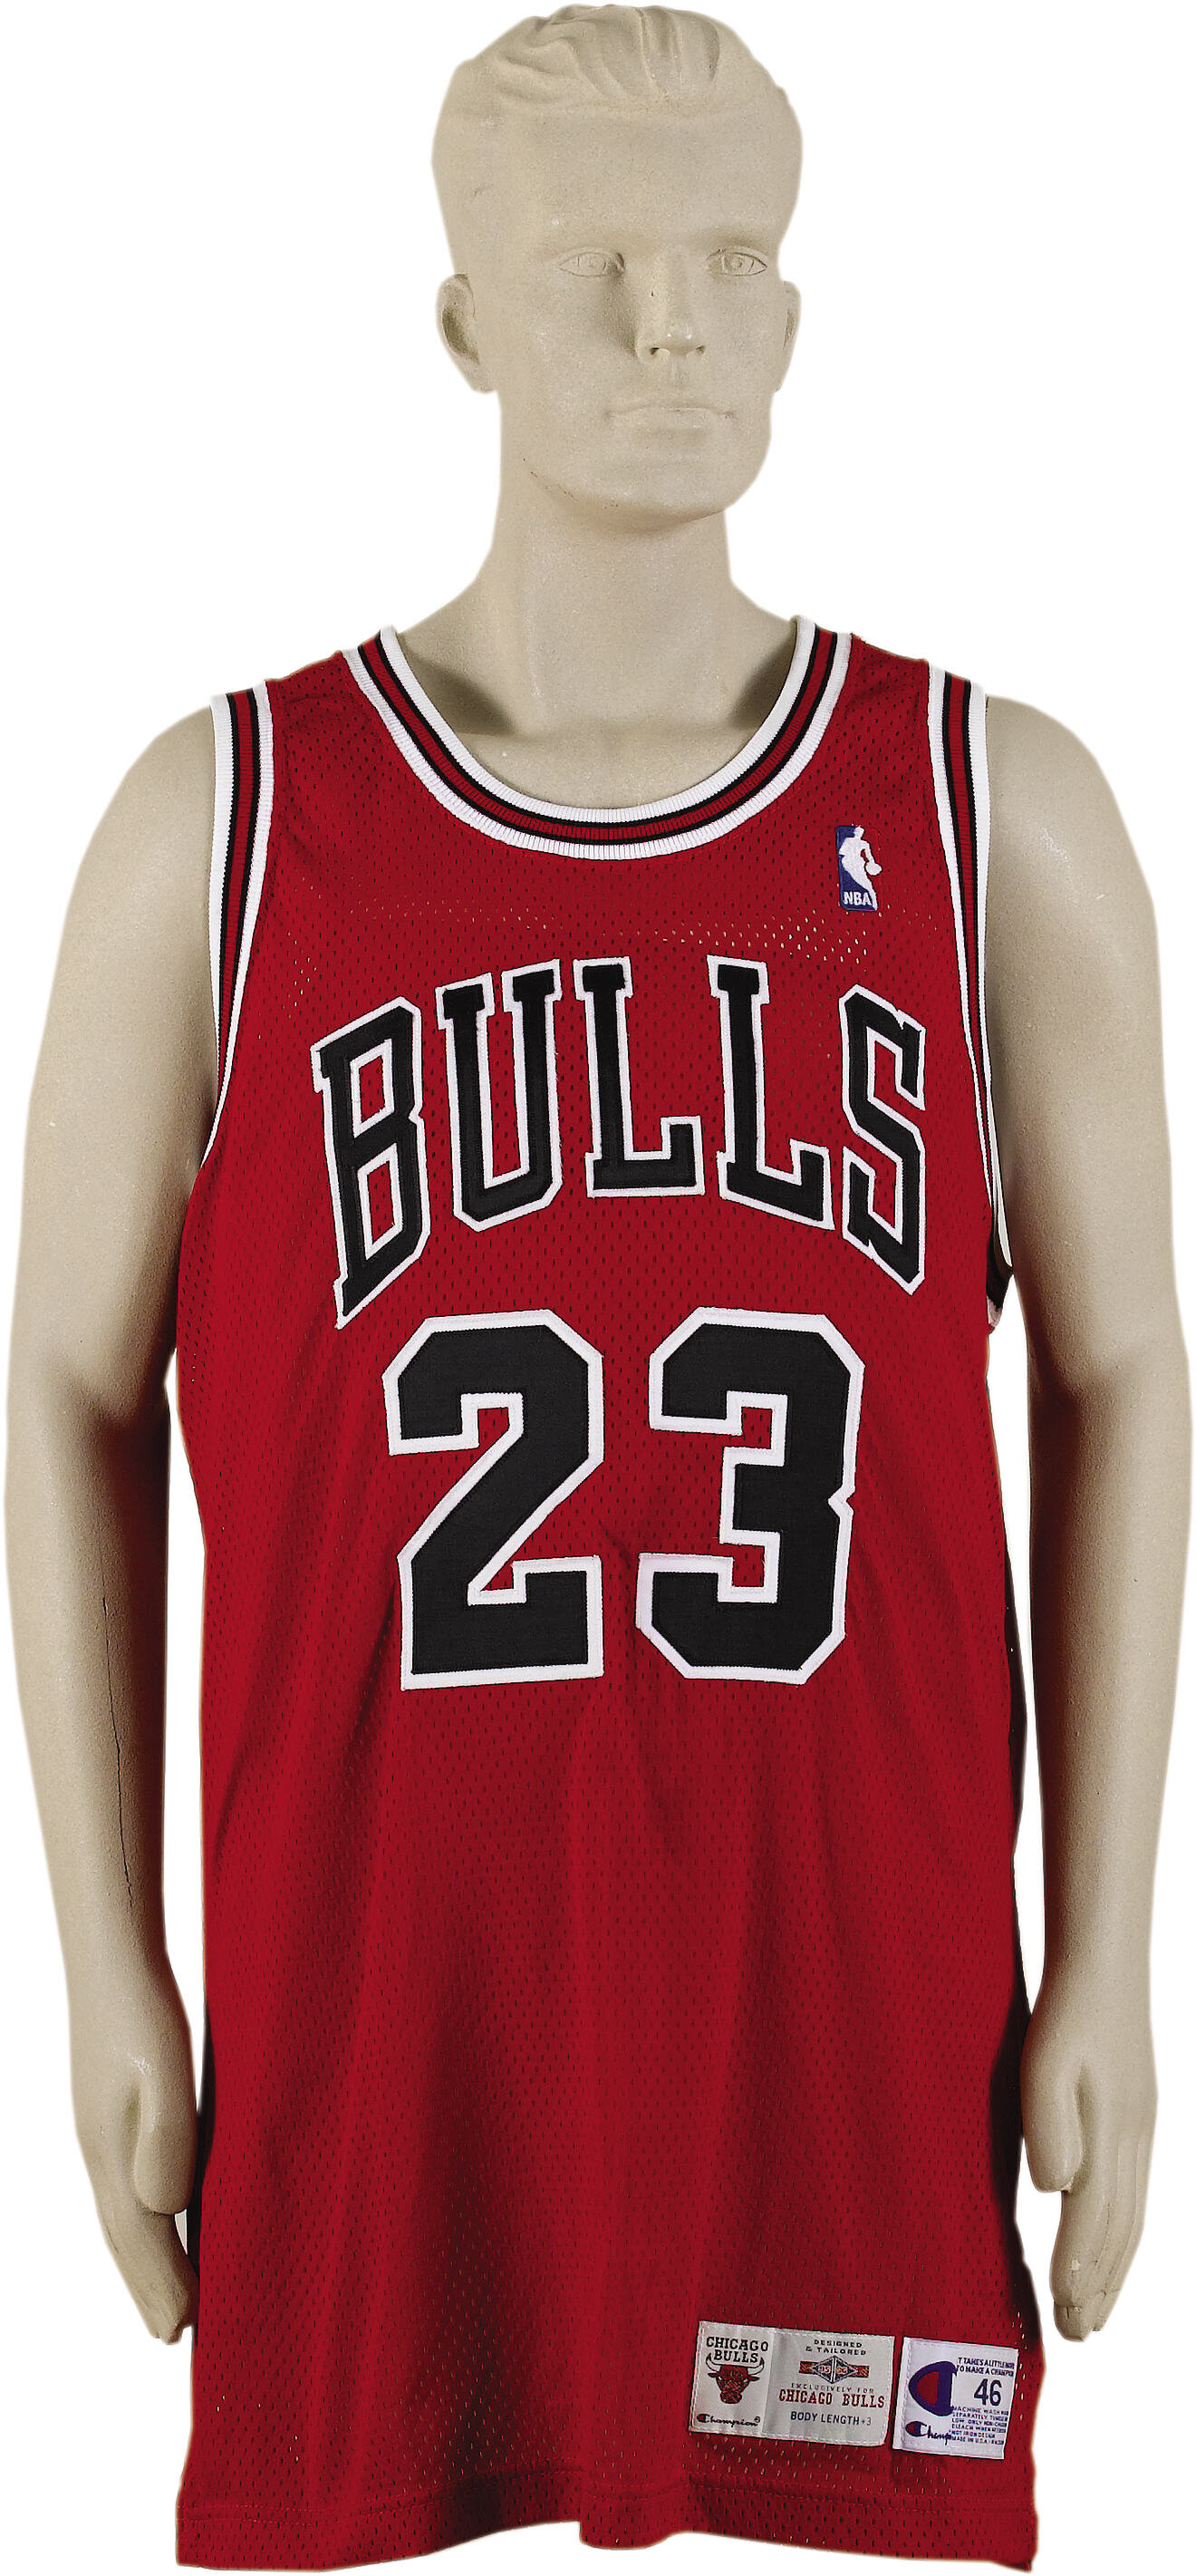 1995-96 Michael Jordan Jersey. What more can be | Lot #19231 | Heritage Auctions